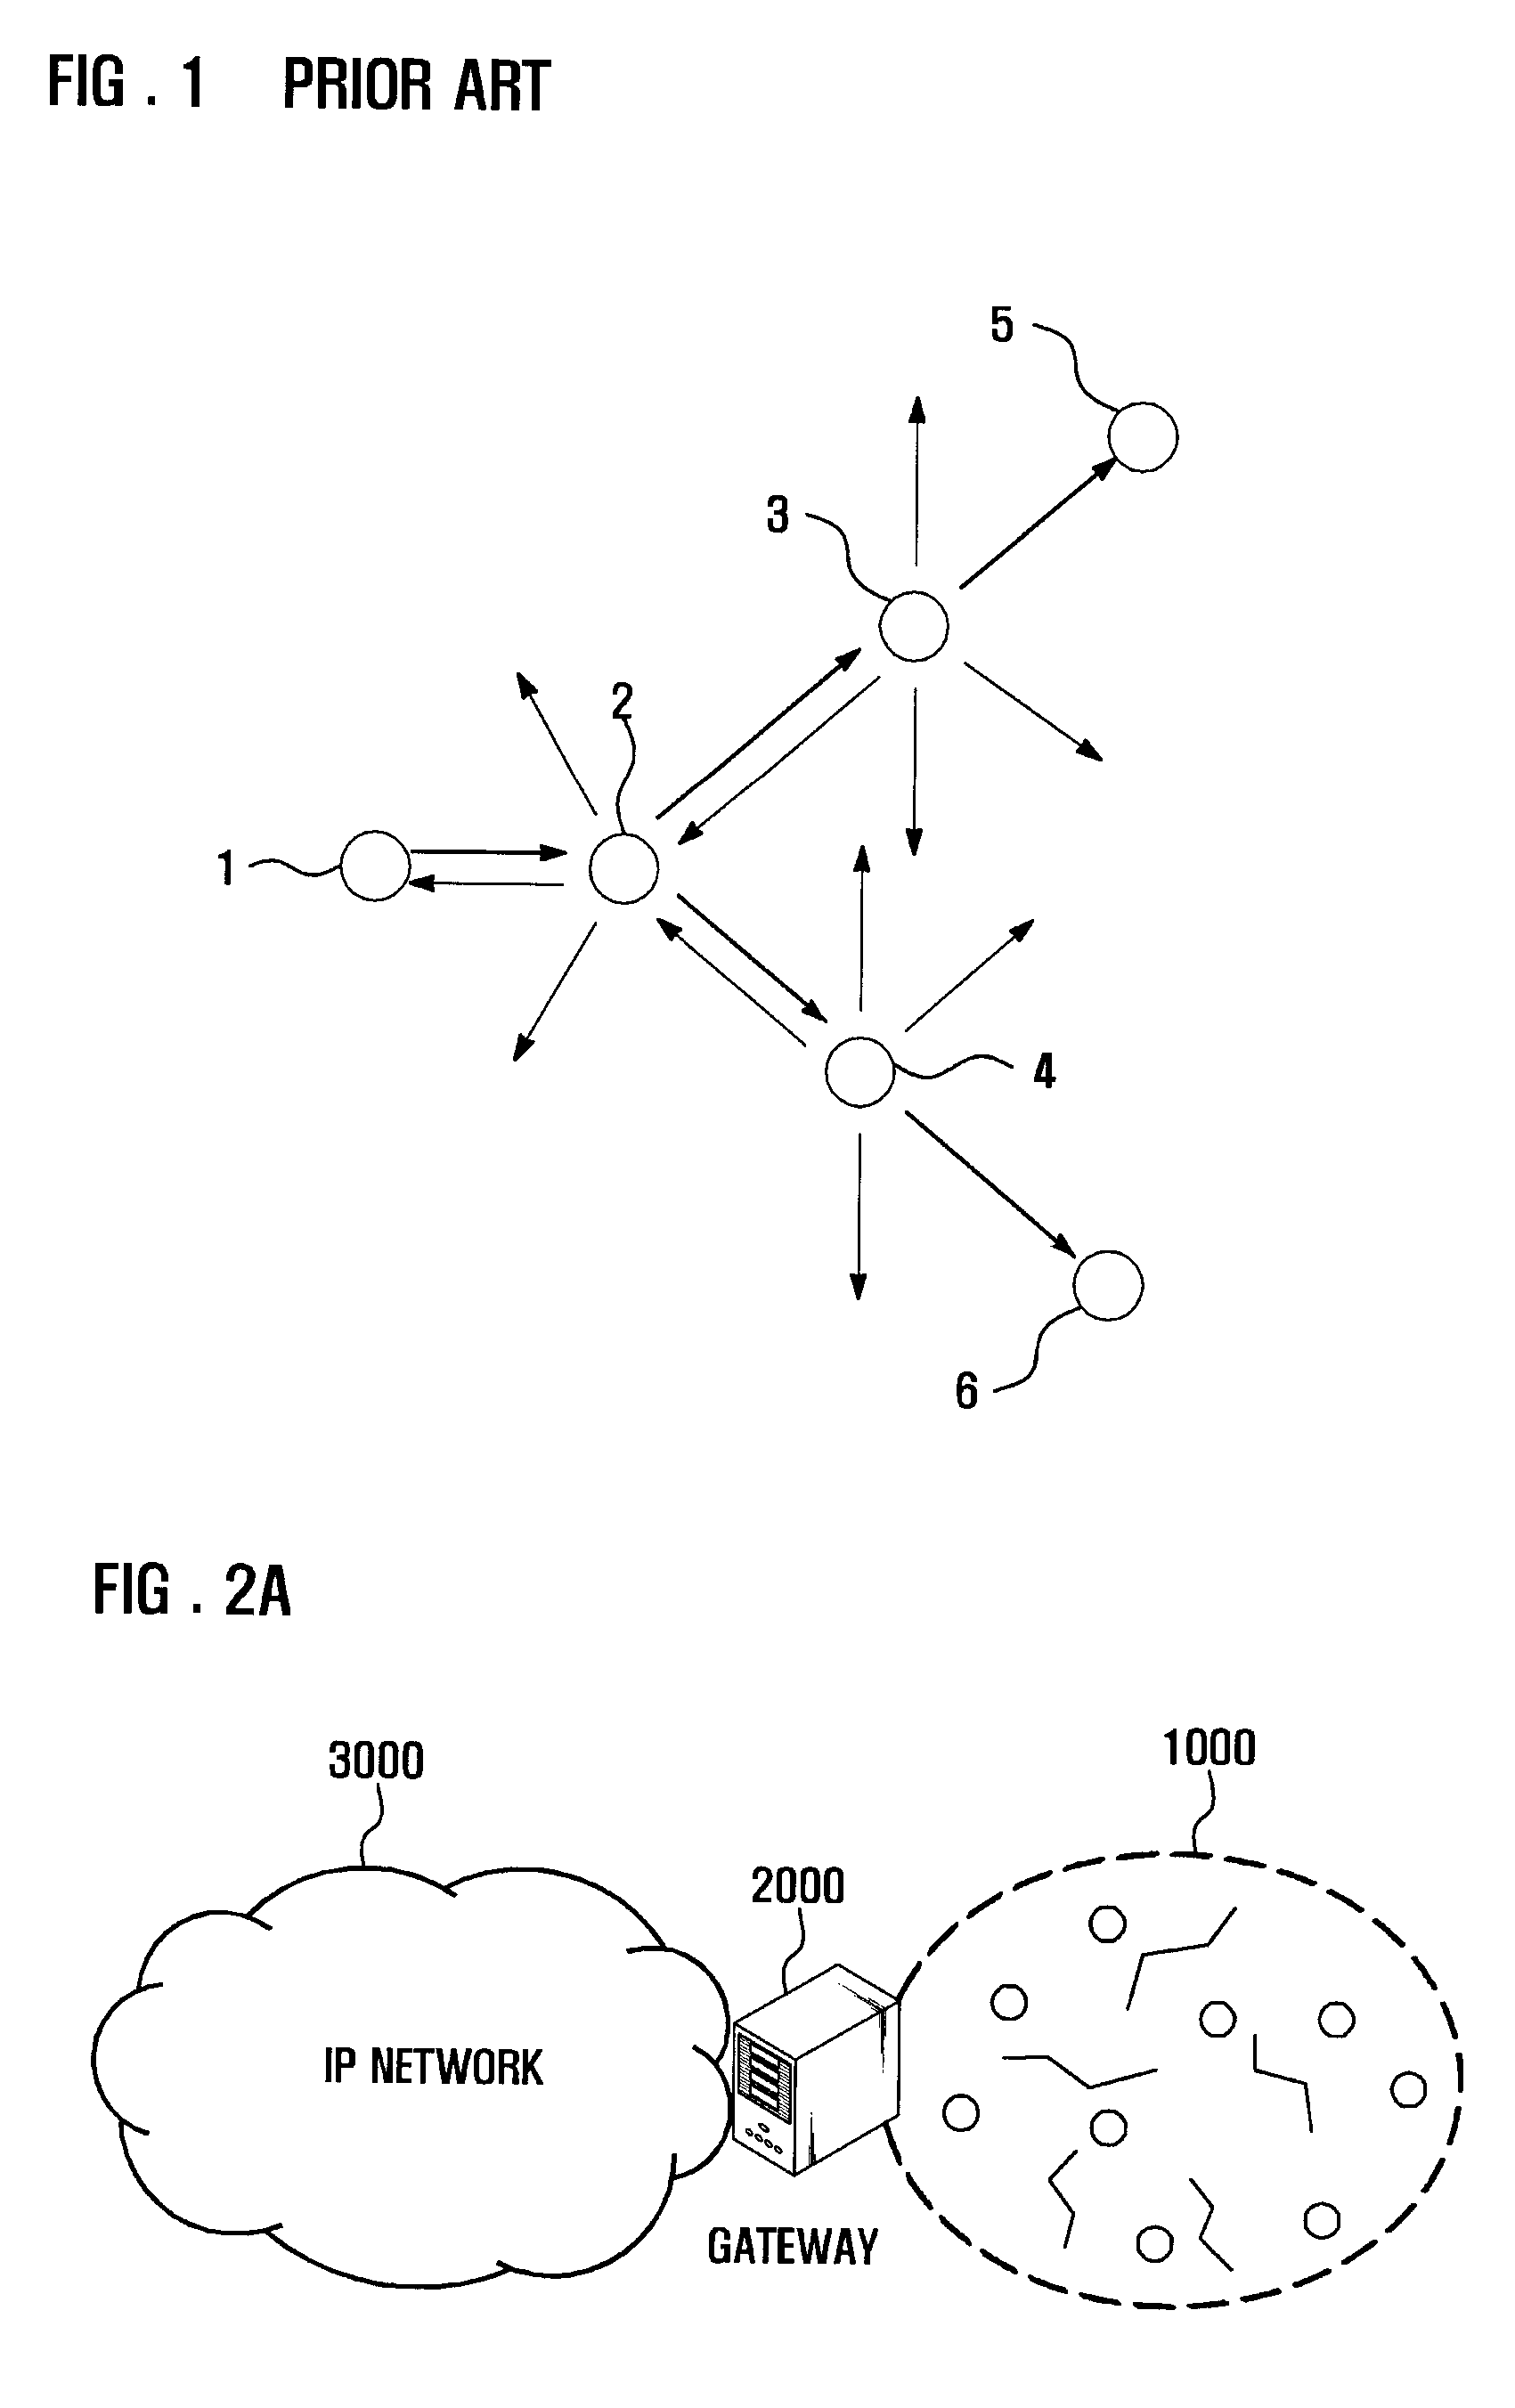 ADDRESS AUTOCONFIGURATION METHOD AND SYSTEM FOR IPv6-BASED LOW-POWER WIRELESS PERSONAL AREA NETWORK